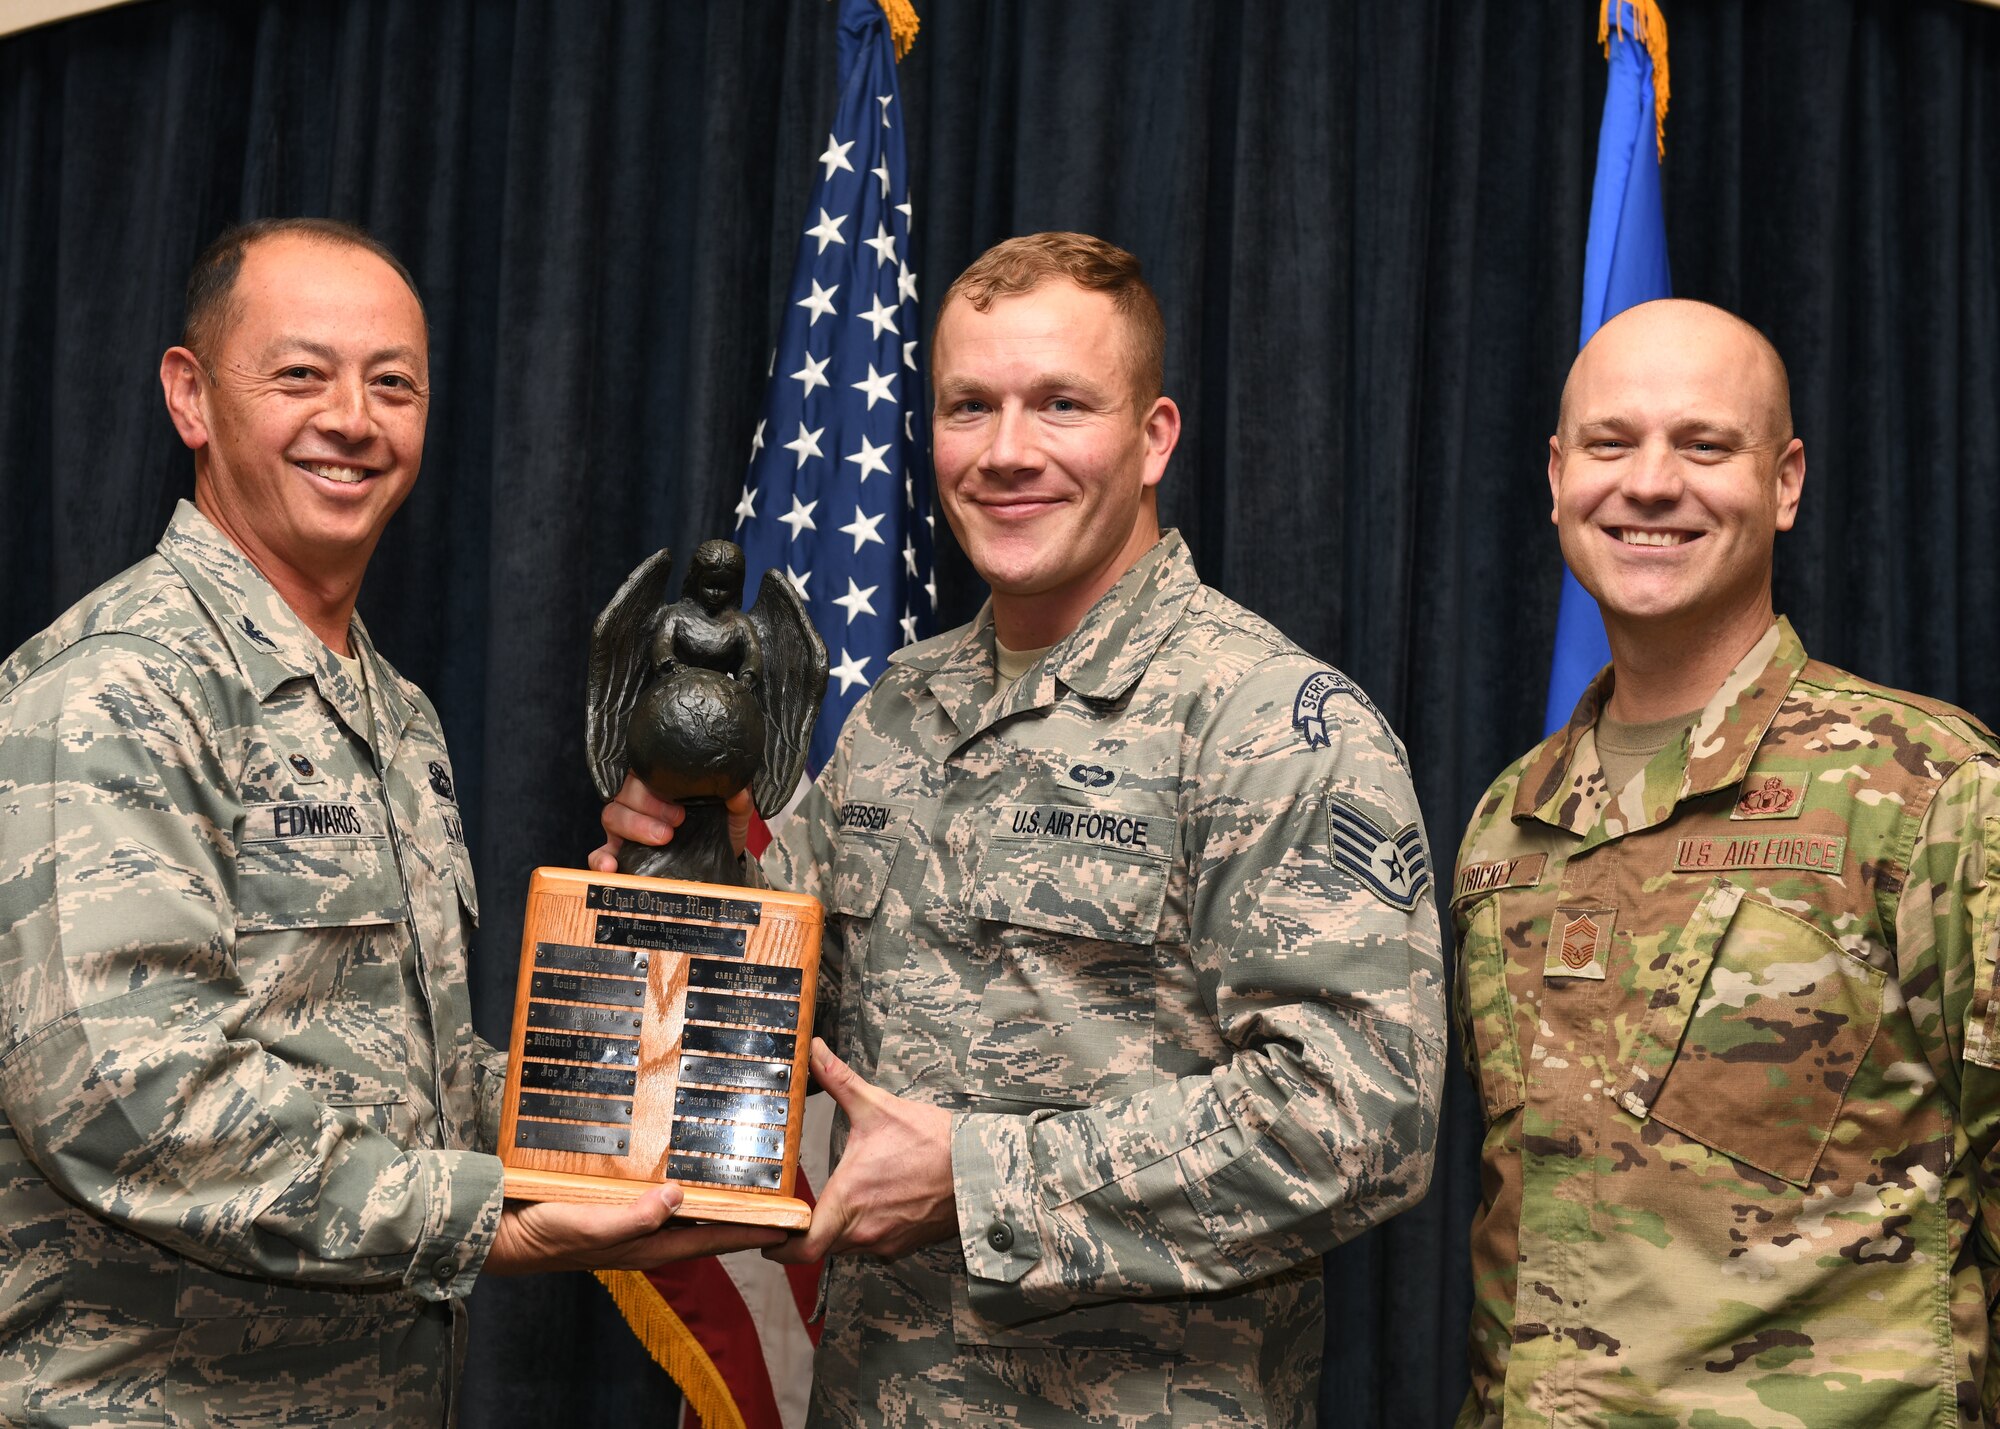 Col. John Edwards and Chief Master Sgt. Jason Trickey present Staff Sgt. Dustin Jespersen with the 2018 Air Association Richard T. Kight Award at the Dakota’s Club on Ellsworth Air Force Base, S.D., Oct. 31, 2018. Edwards is the 28th Bomb Wing commander; Jespersen is a 28th Operations Squadron survival, evasion, resistance and escape specialist; and Trickey is the 28th Operations Group superintendent. After being awarded the 2018 Air Rescue Association Richard T. Kight Award, Jespersen was promoted to technical sergeant as part of the Stripes for Exceptional Performers (STEP) program. (U.S. Air Force photo by Airman 1st Class Thomas Karol)